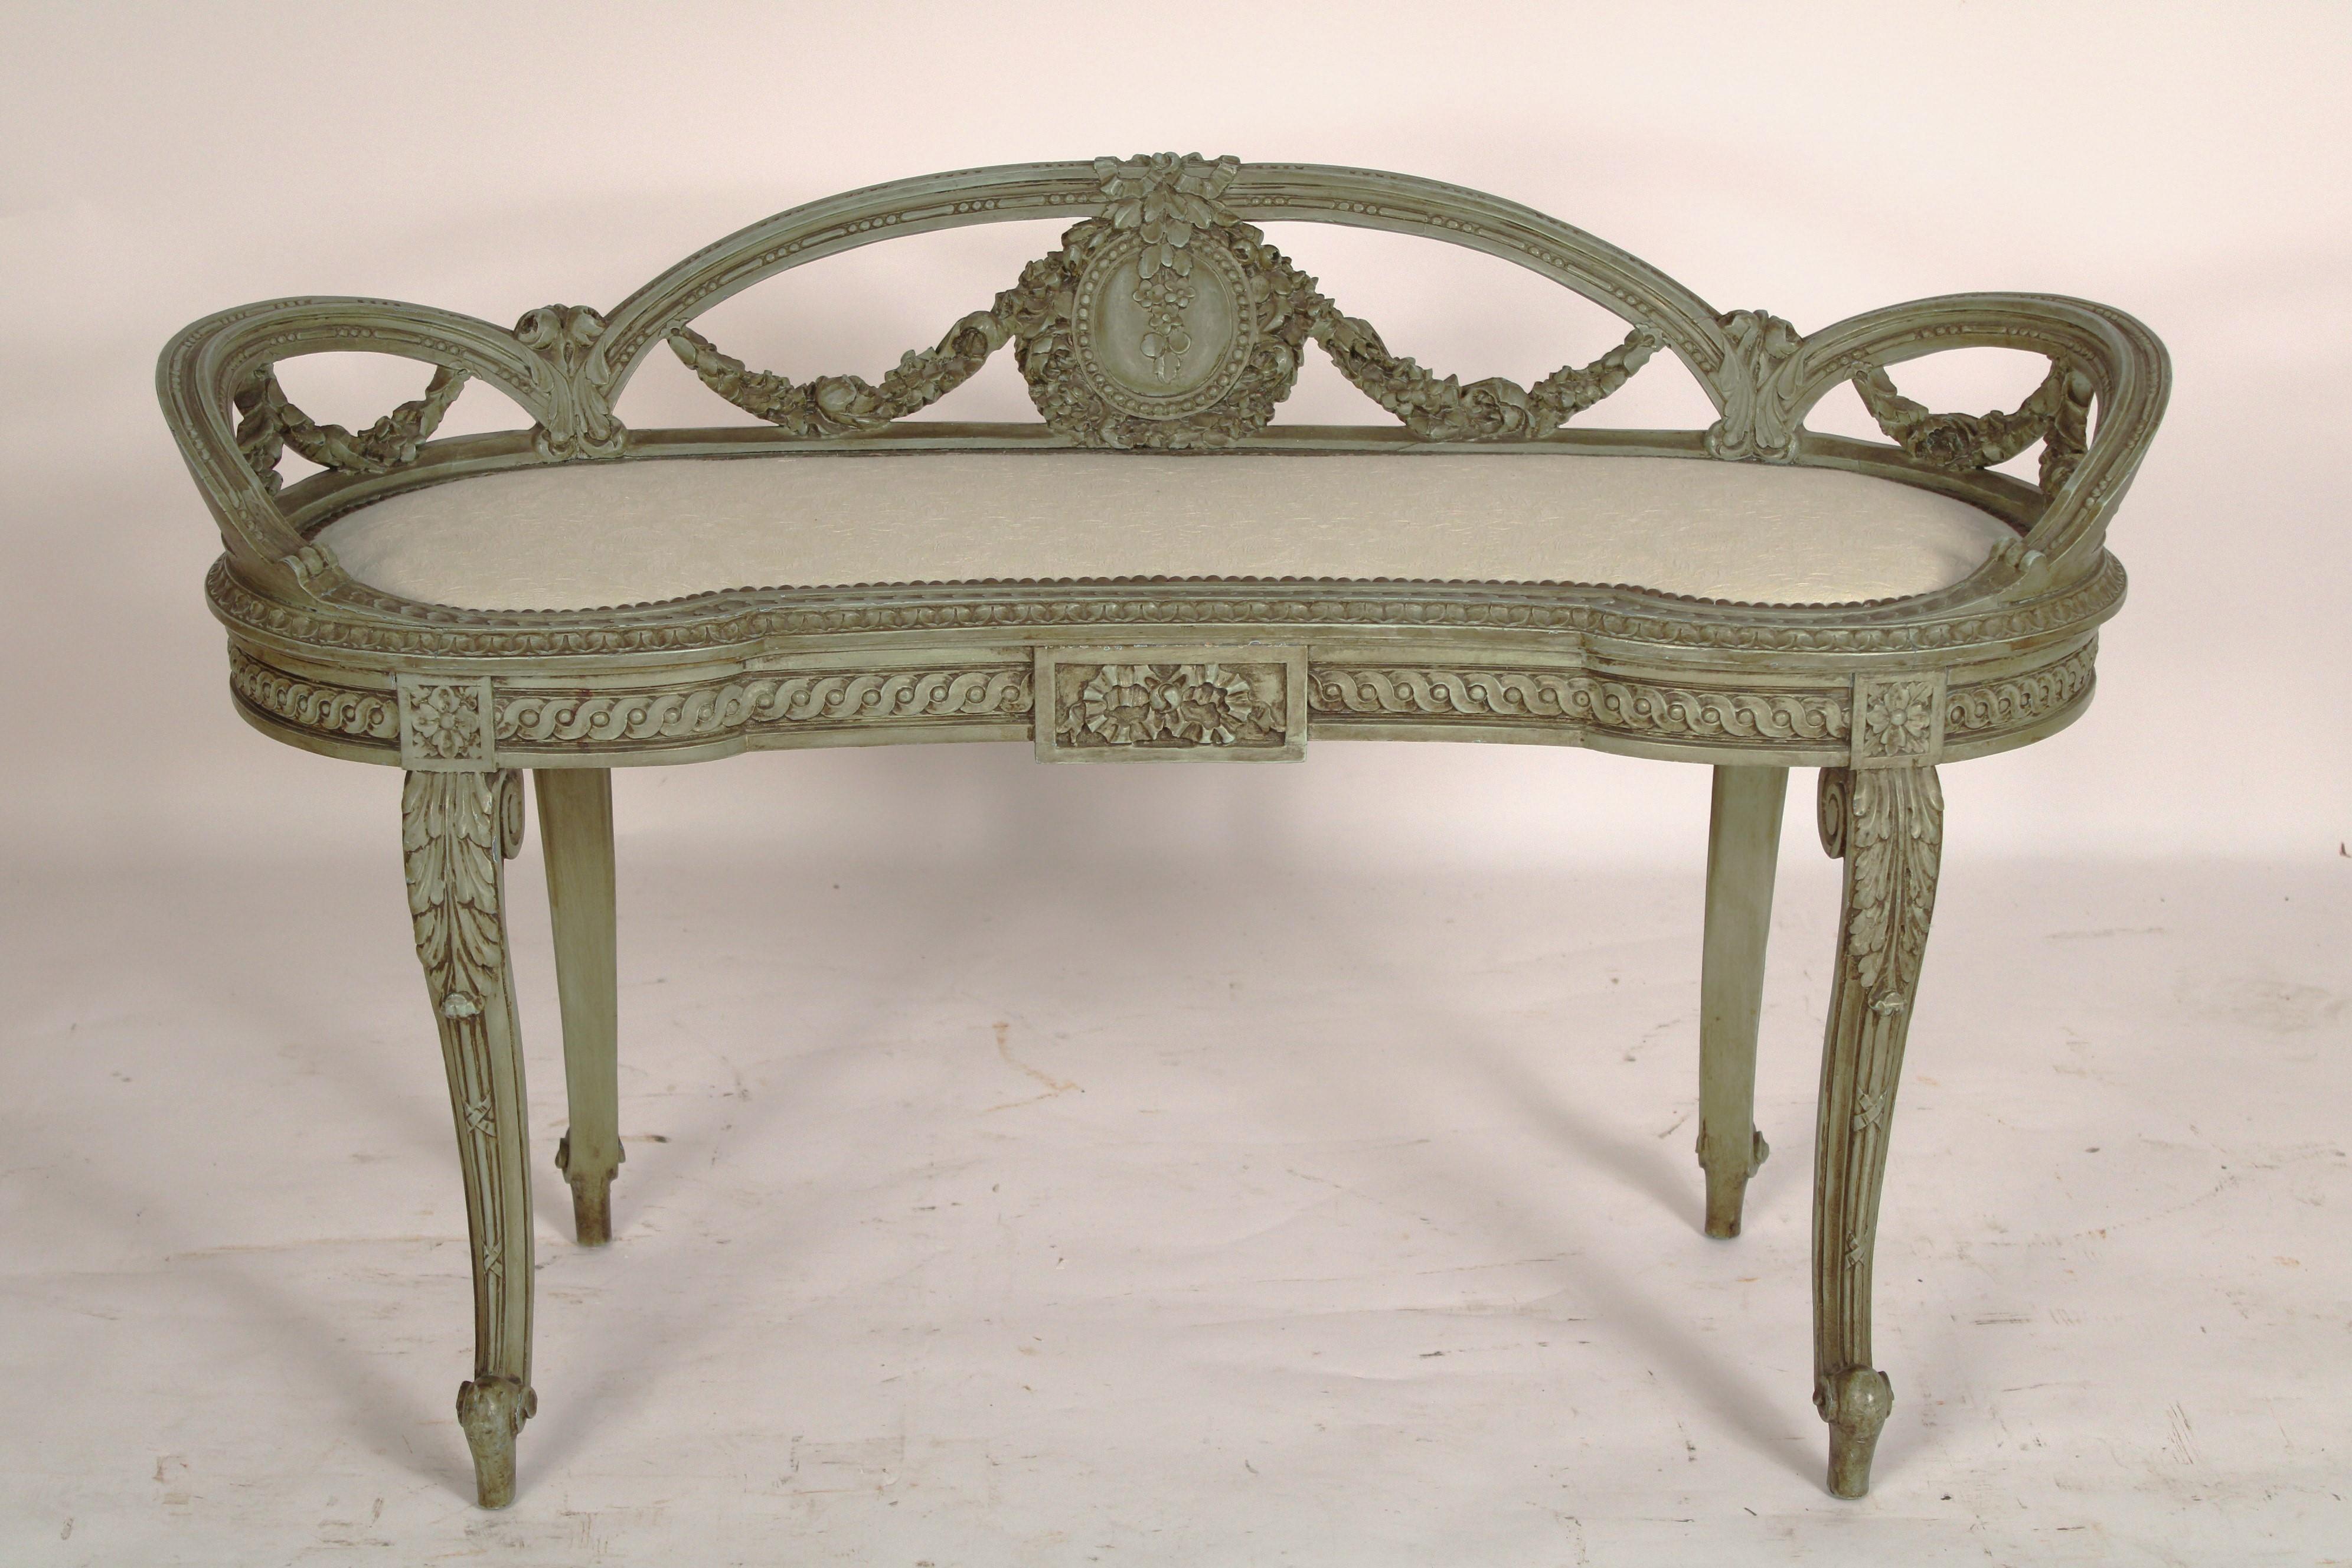 Louis XV / XVI transitional style green painted bench, circa 1930's. With a slightly raised back with carved swags, a kidney shaped upholstered seat 
with brass nail heads, a gouilloche carved apron, resting on 4 cabriole legs with acanthus carved